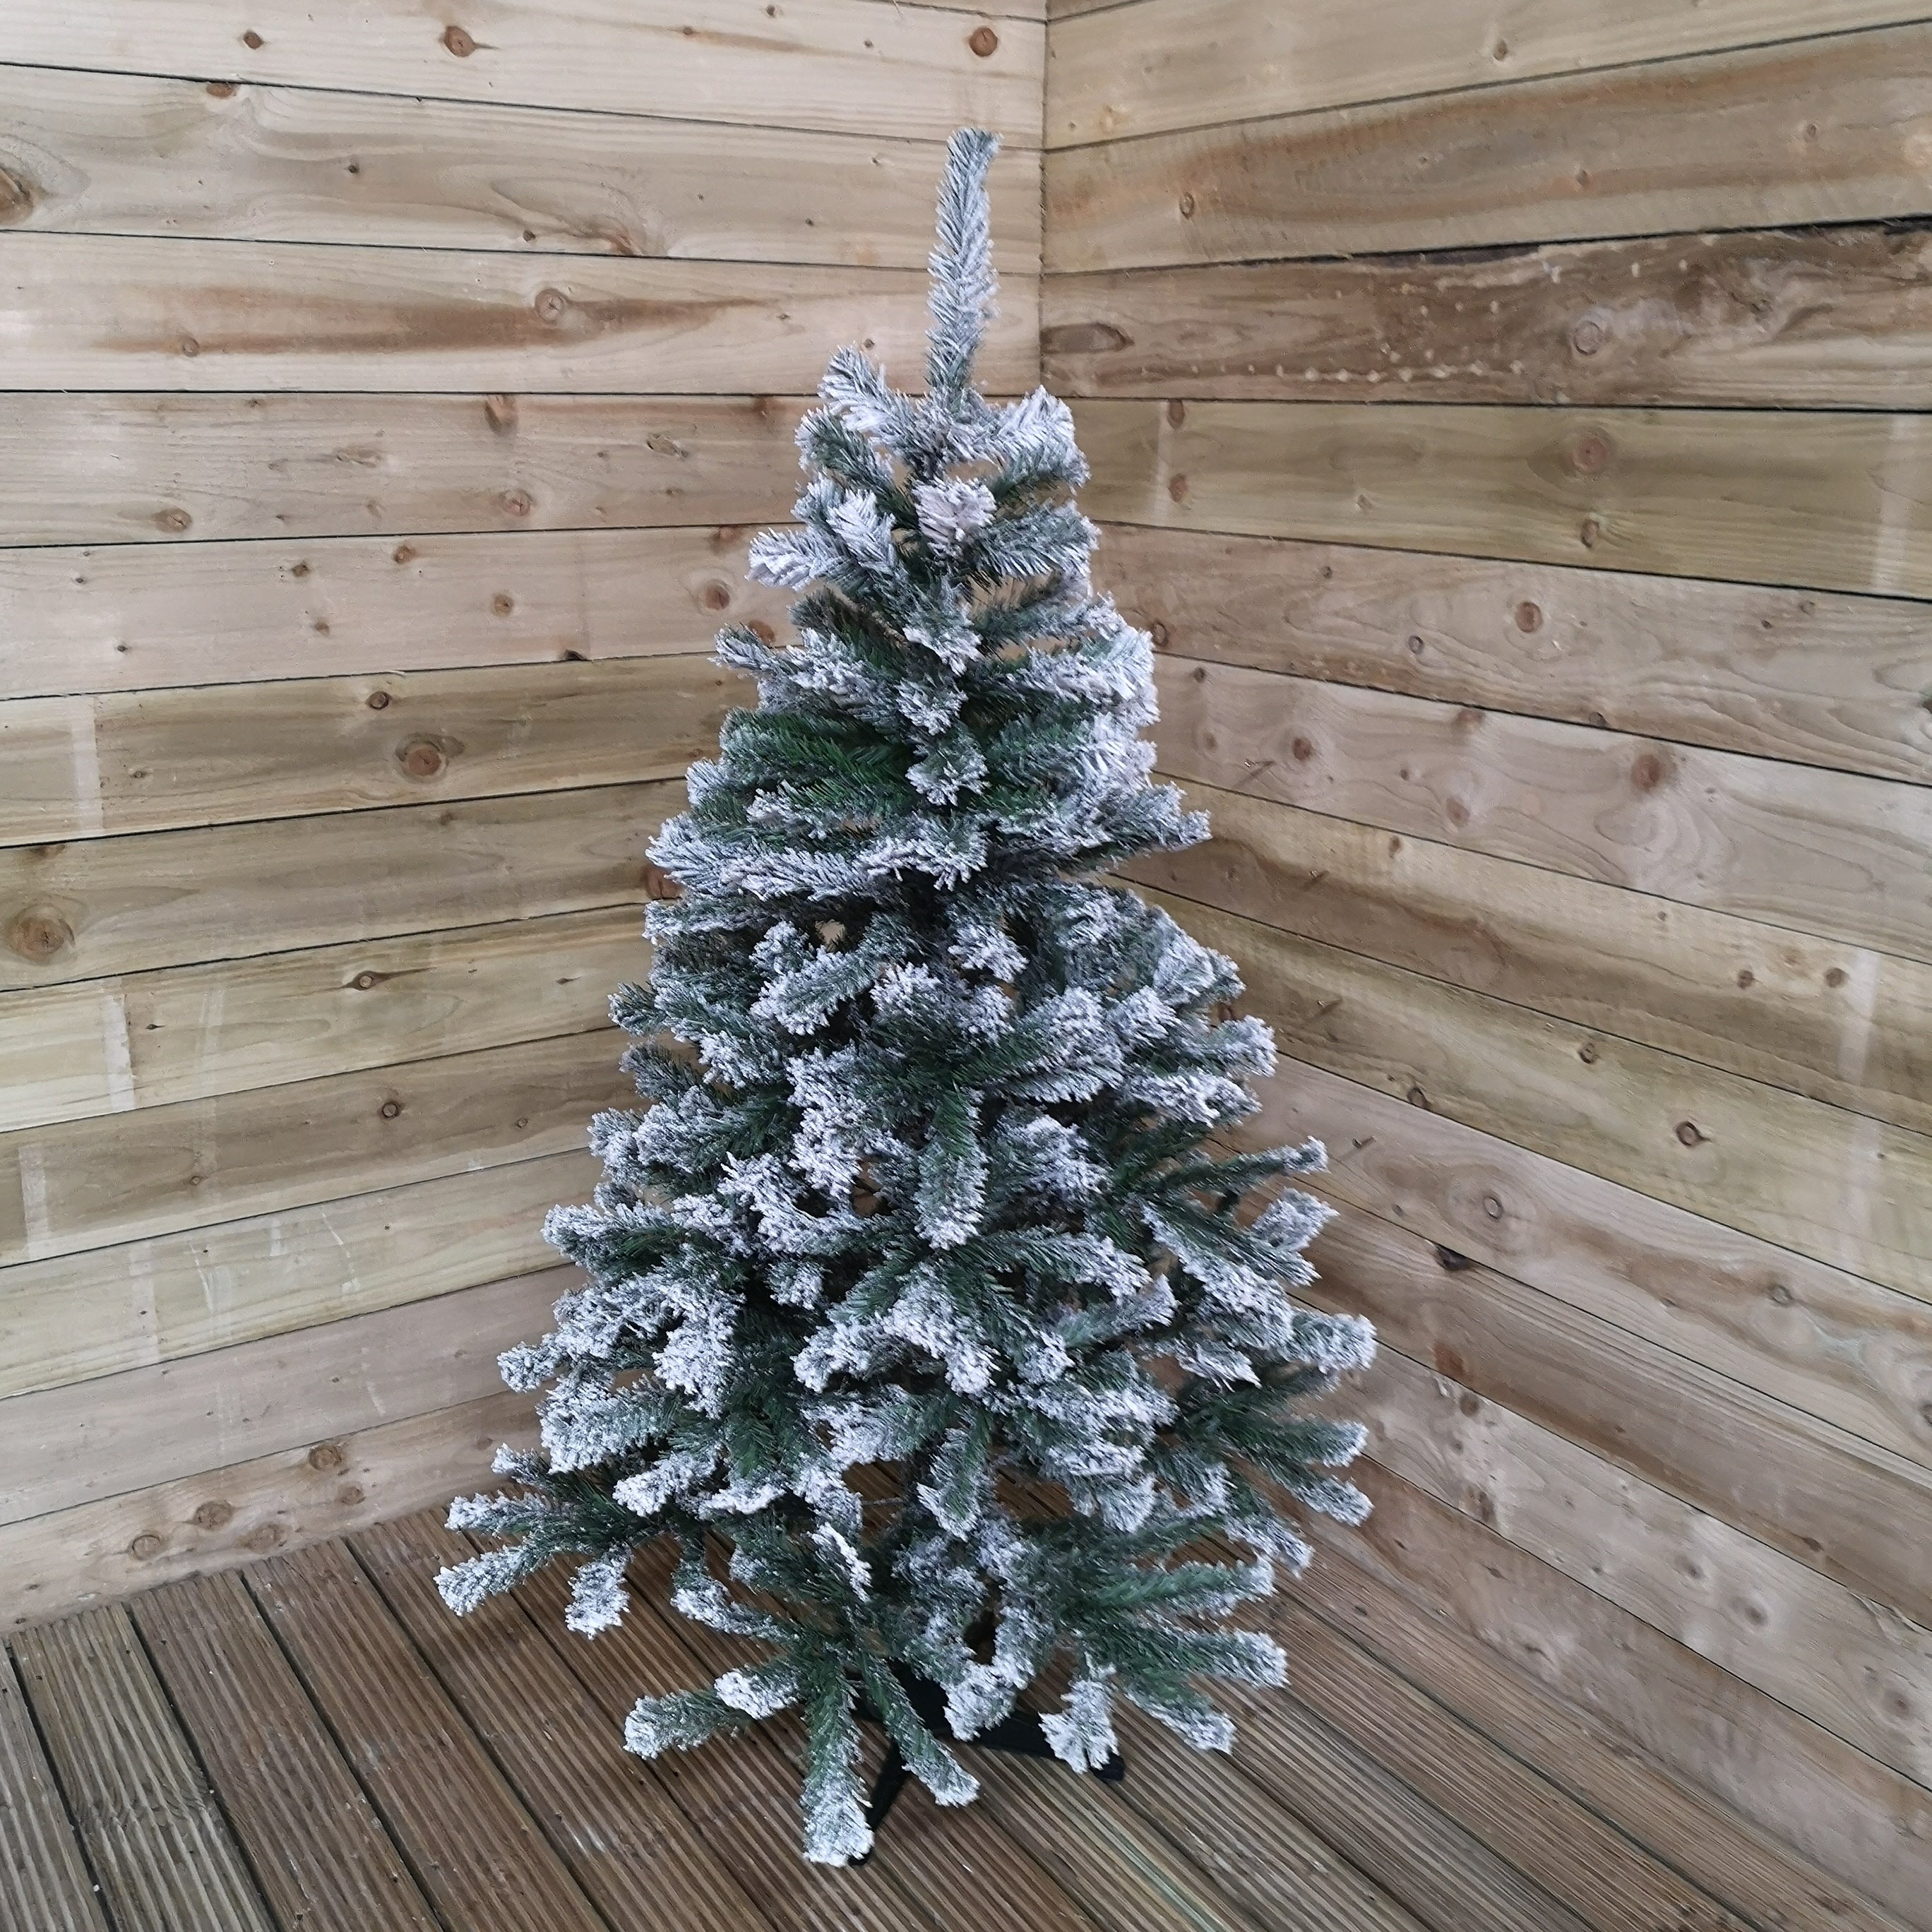 5ft (1.5m) Colorado Snow Spruce Flocked Christmas Tree with 339 Tips